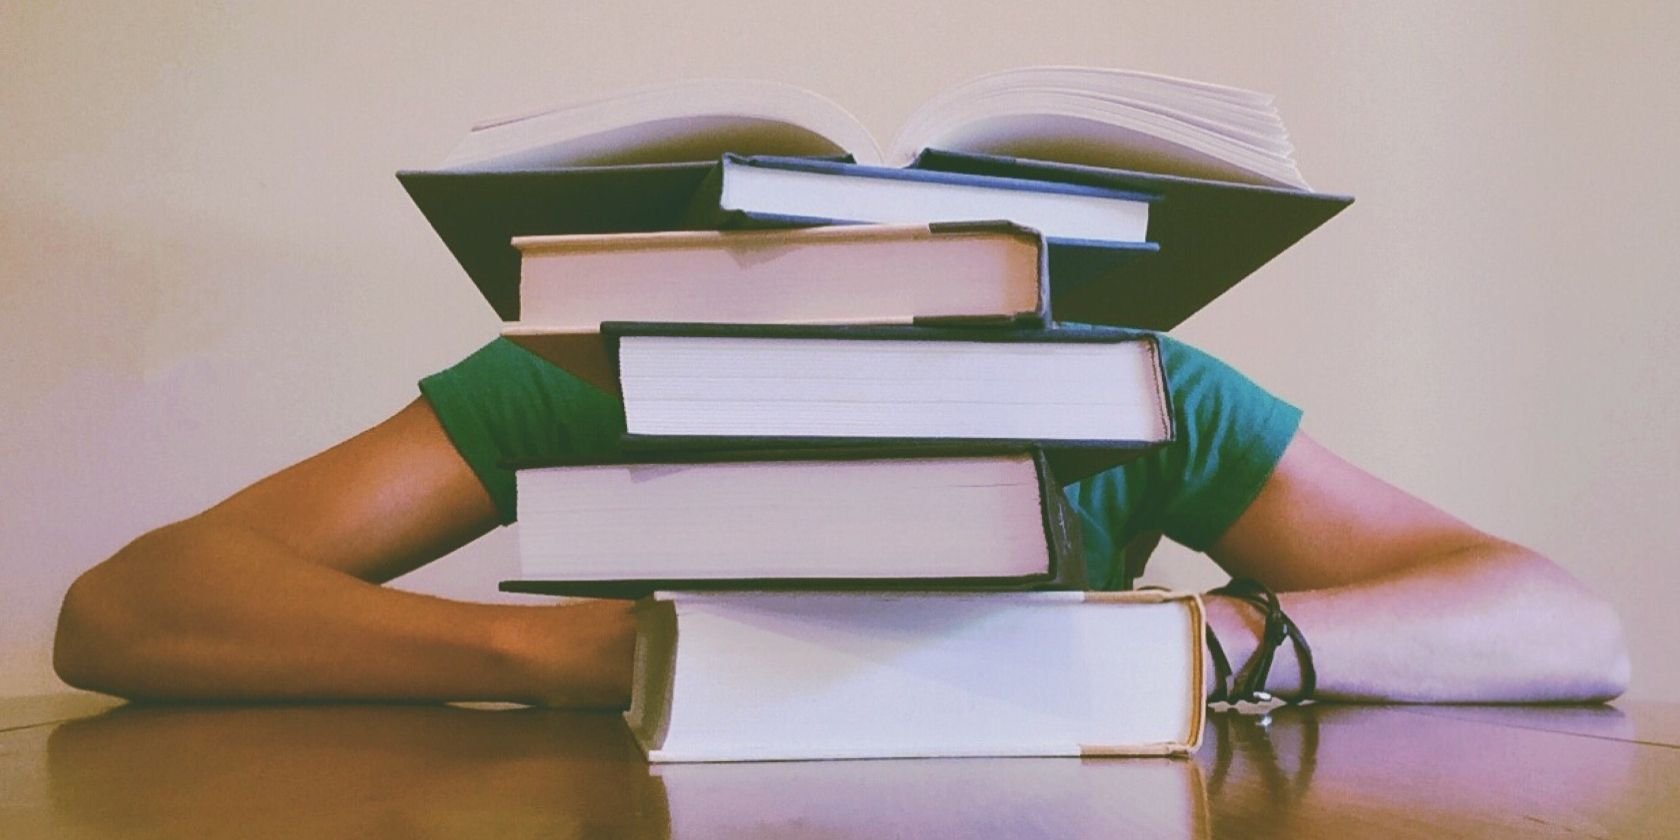 The 7 Best Apps to Help You Study and Stay Organized